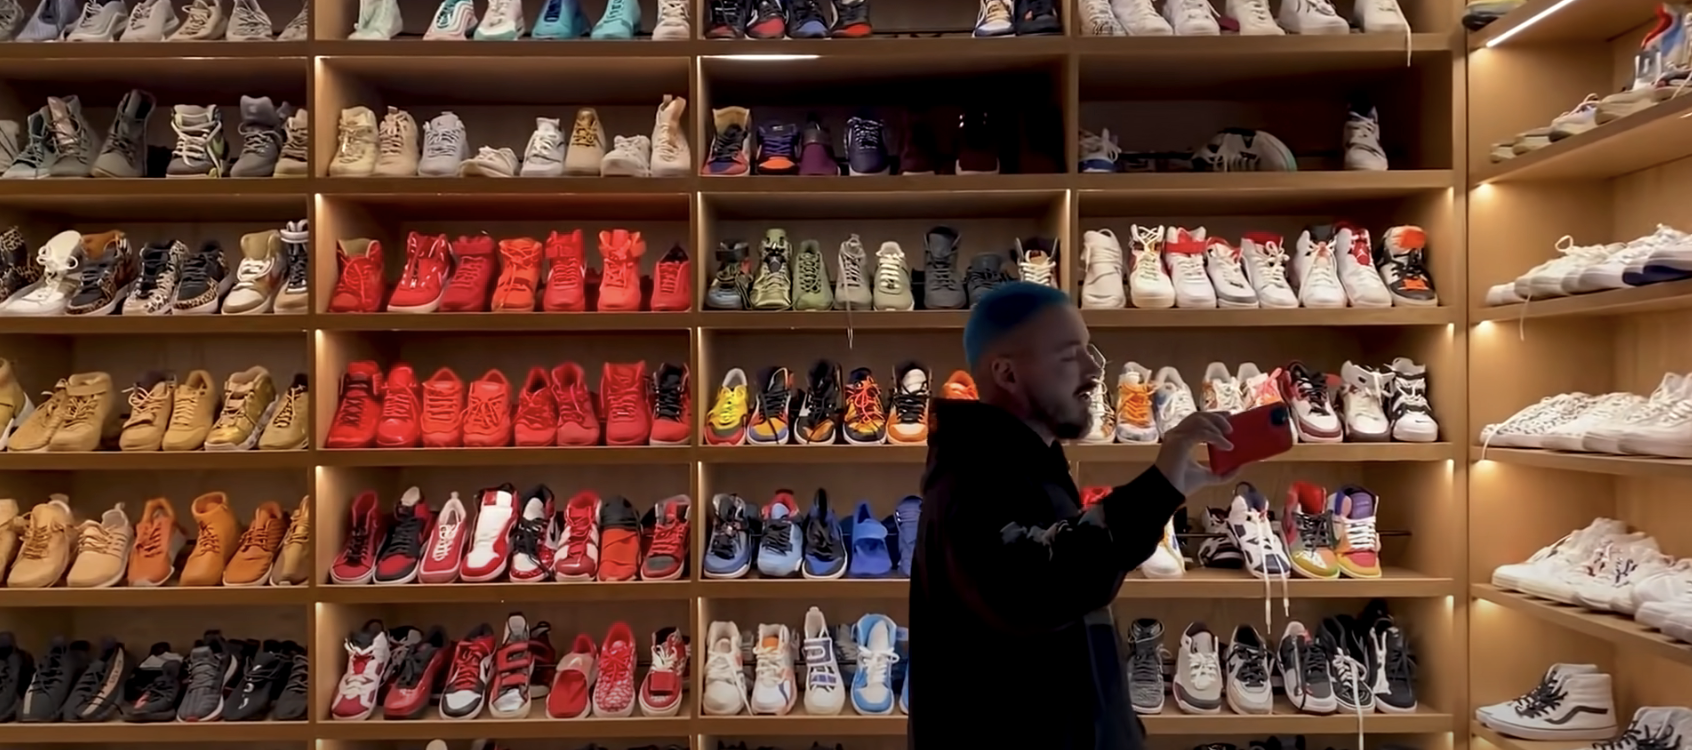 J Balvin&#x27;s shoe wall organized by color